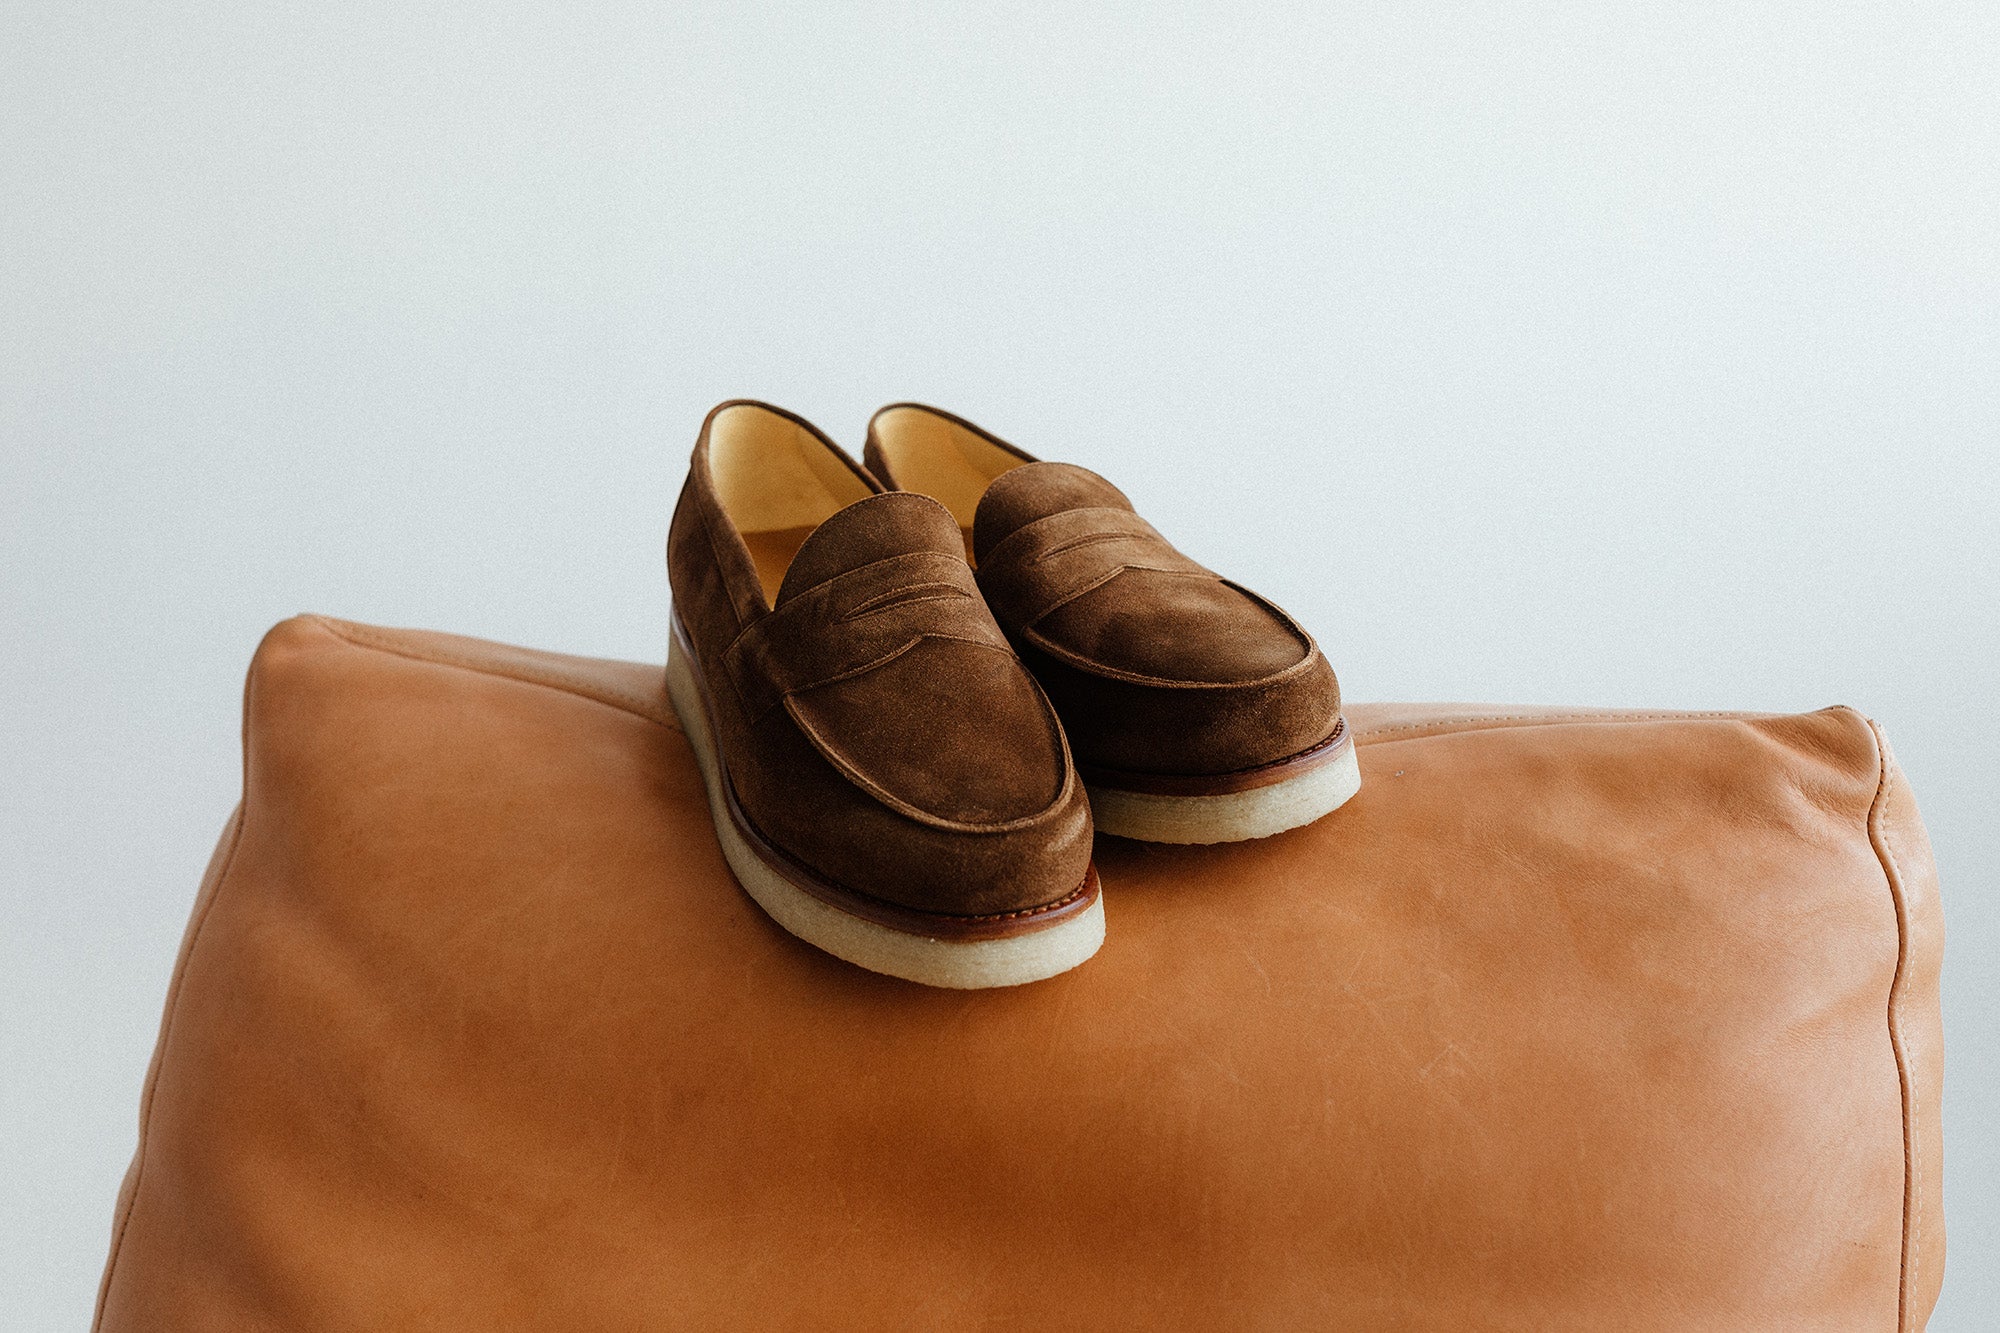 A pair of brown loafers on a leather couch.